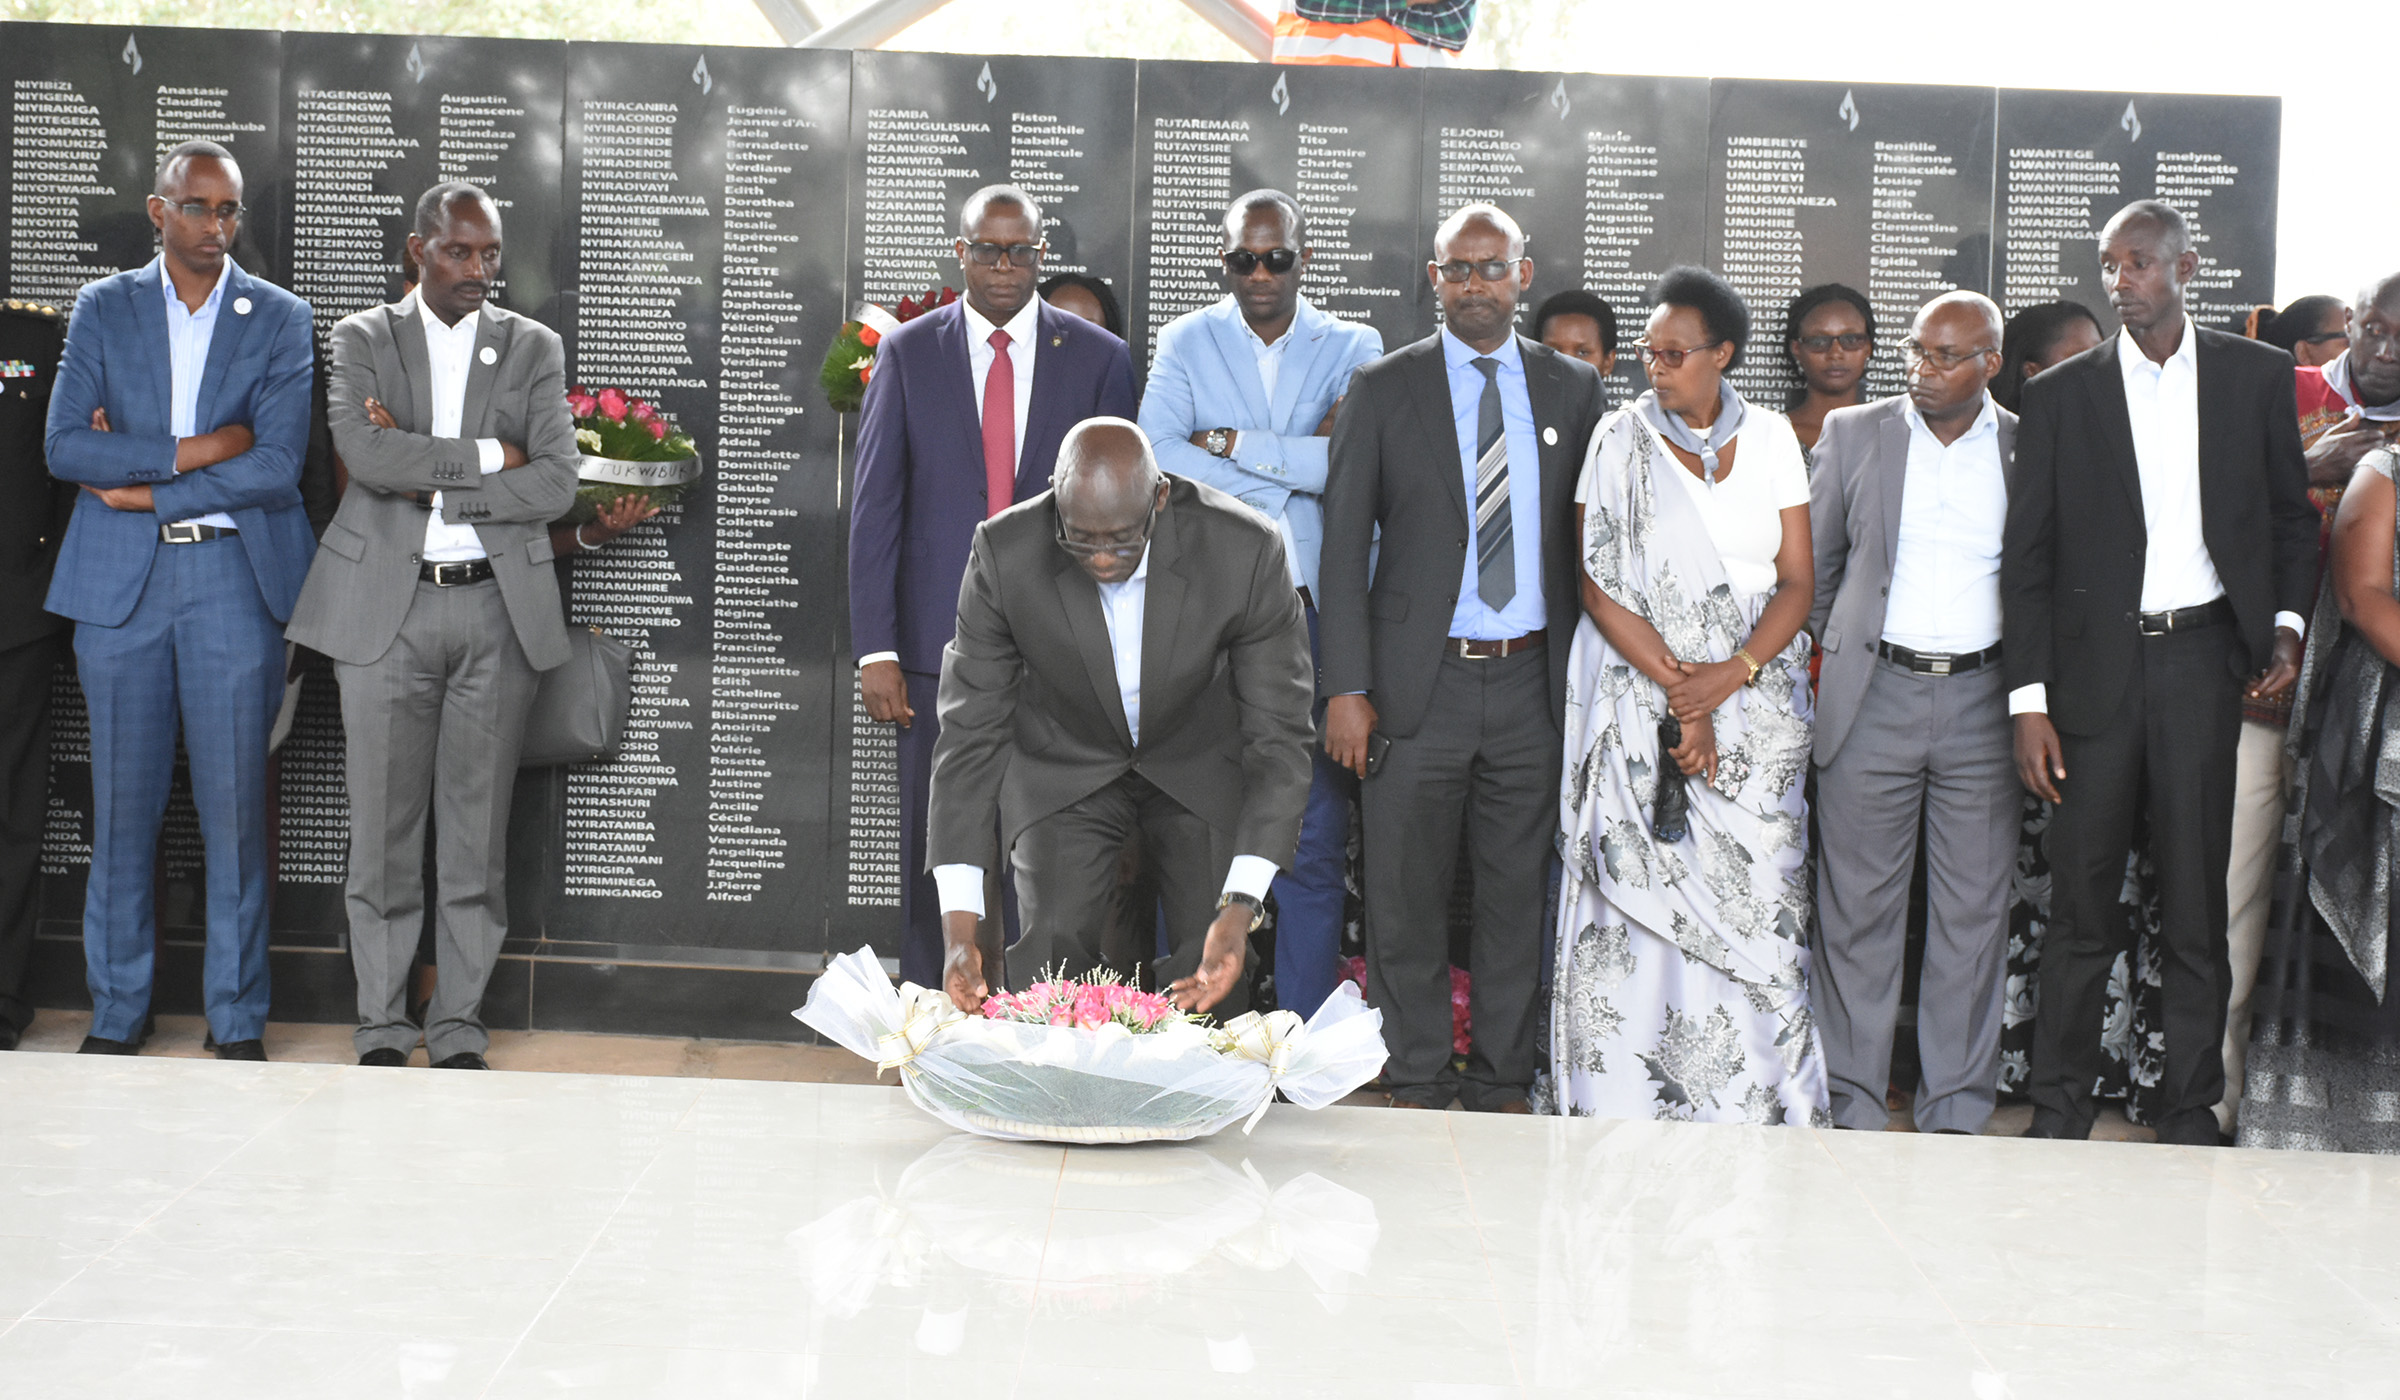 Minister Busingye laying flowers on Ntarama memorial grave, after presiding over the decent burial of 165 victims of Genocide against the Tutsi